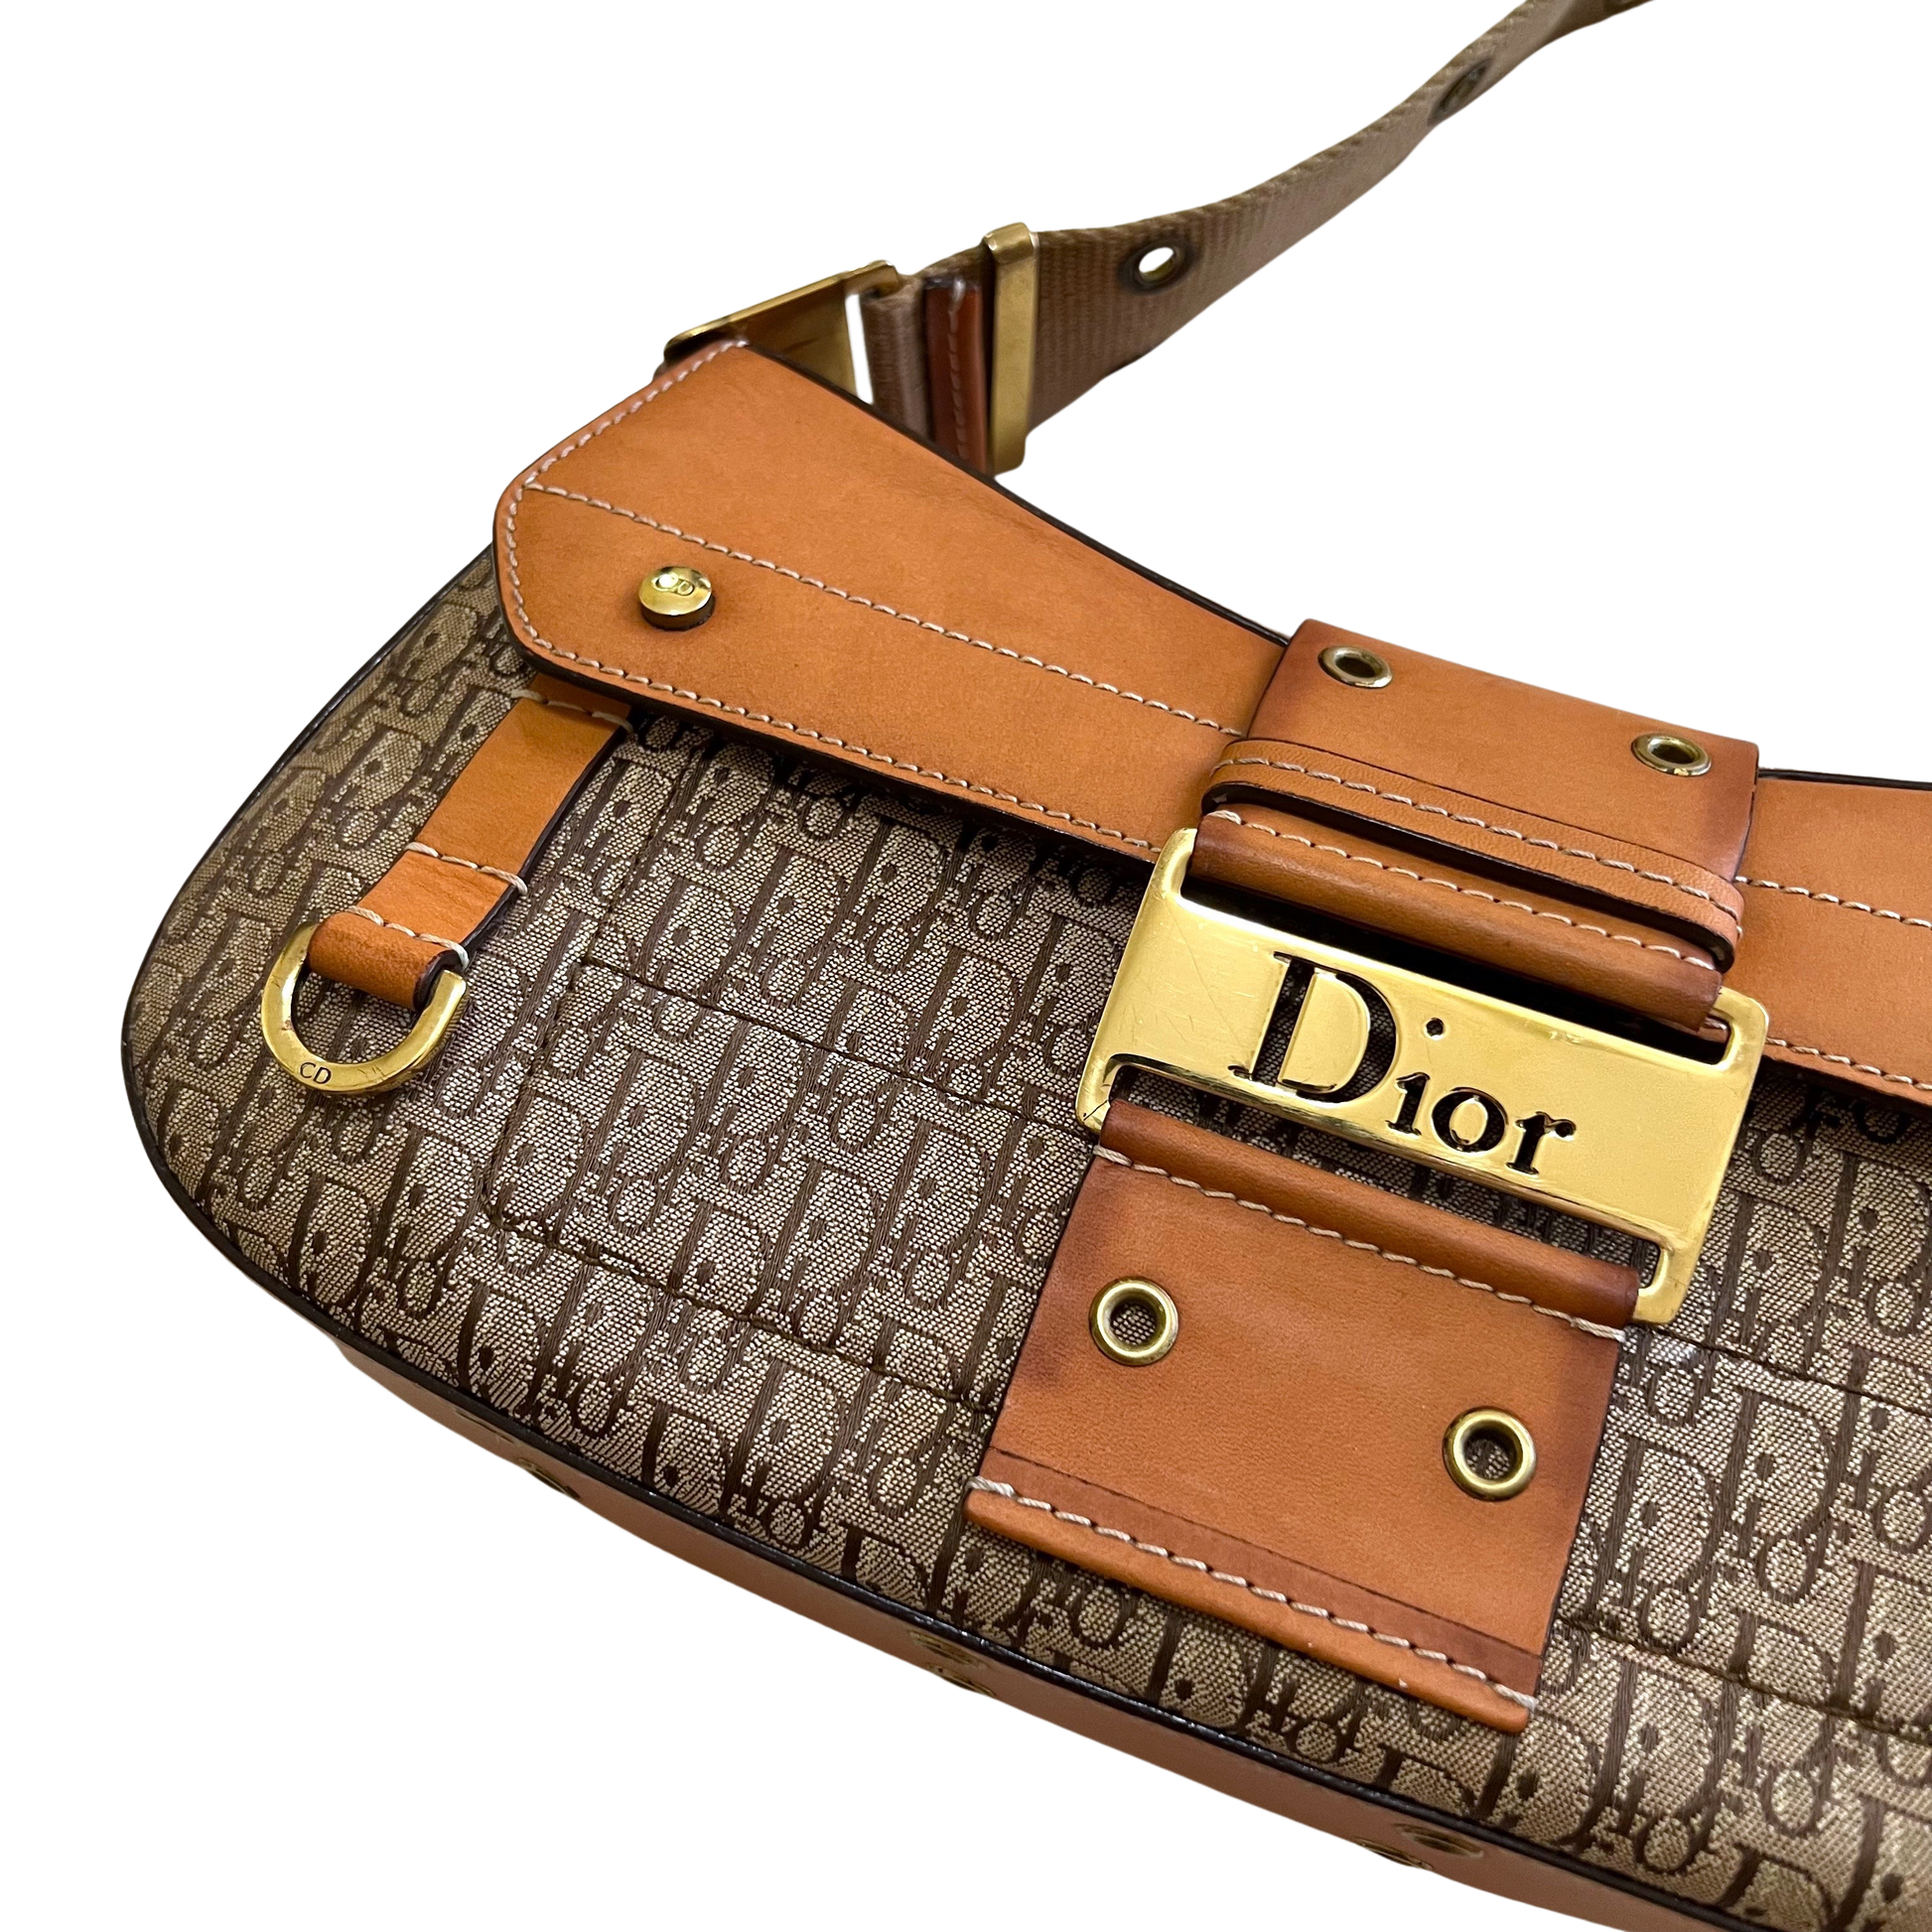 Archive Christian Dior Columbus bag, excellent vintage condition, priced at  $1550